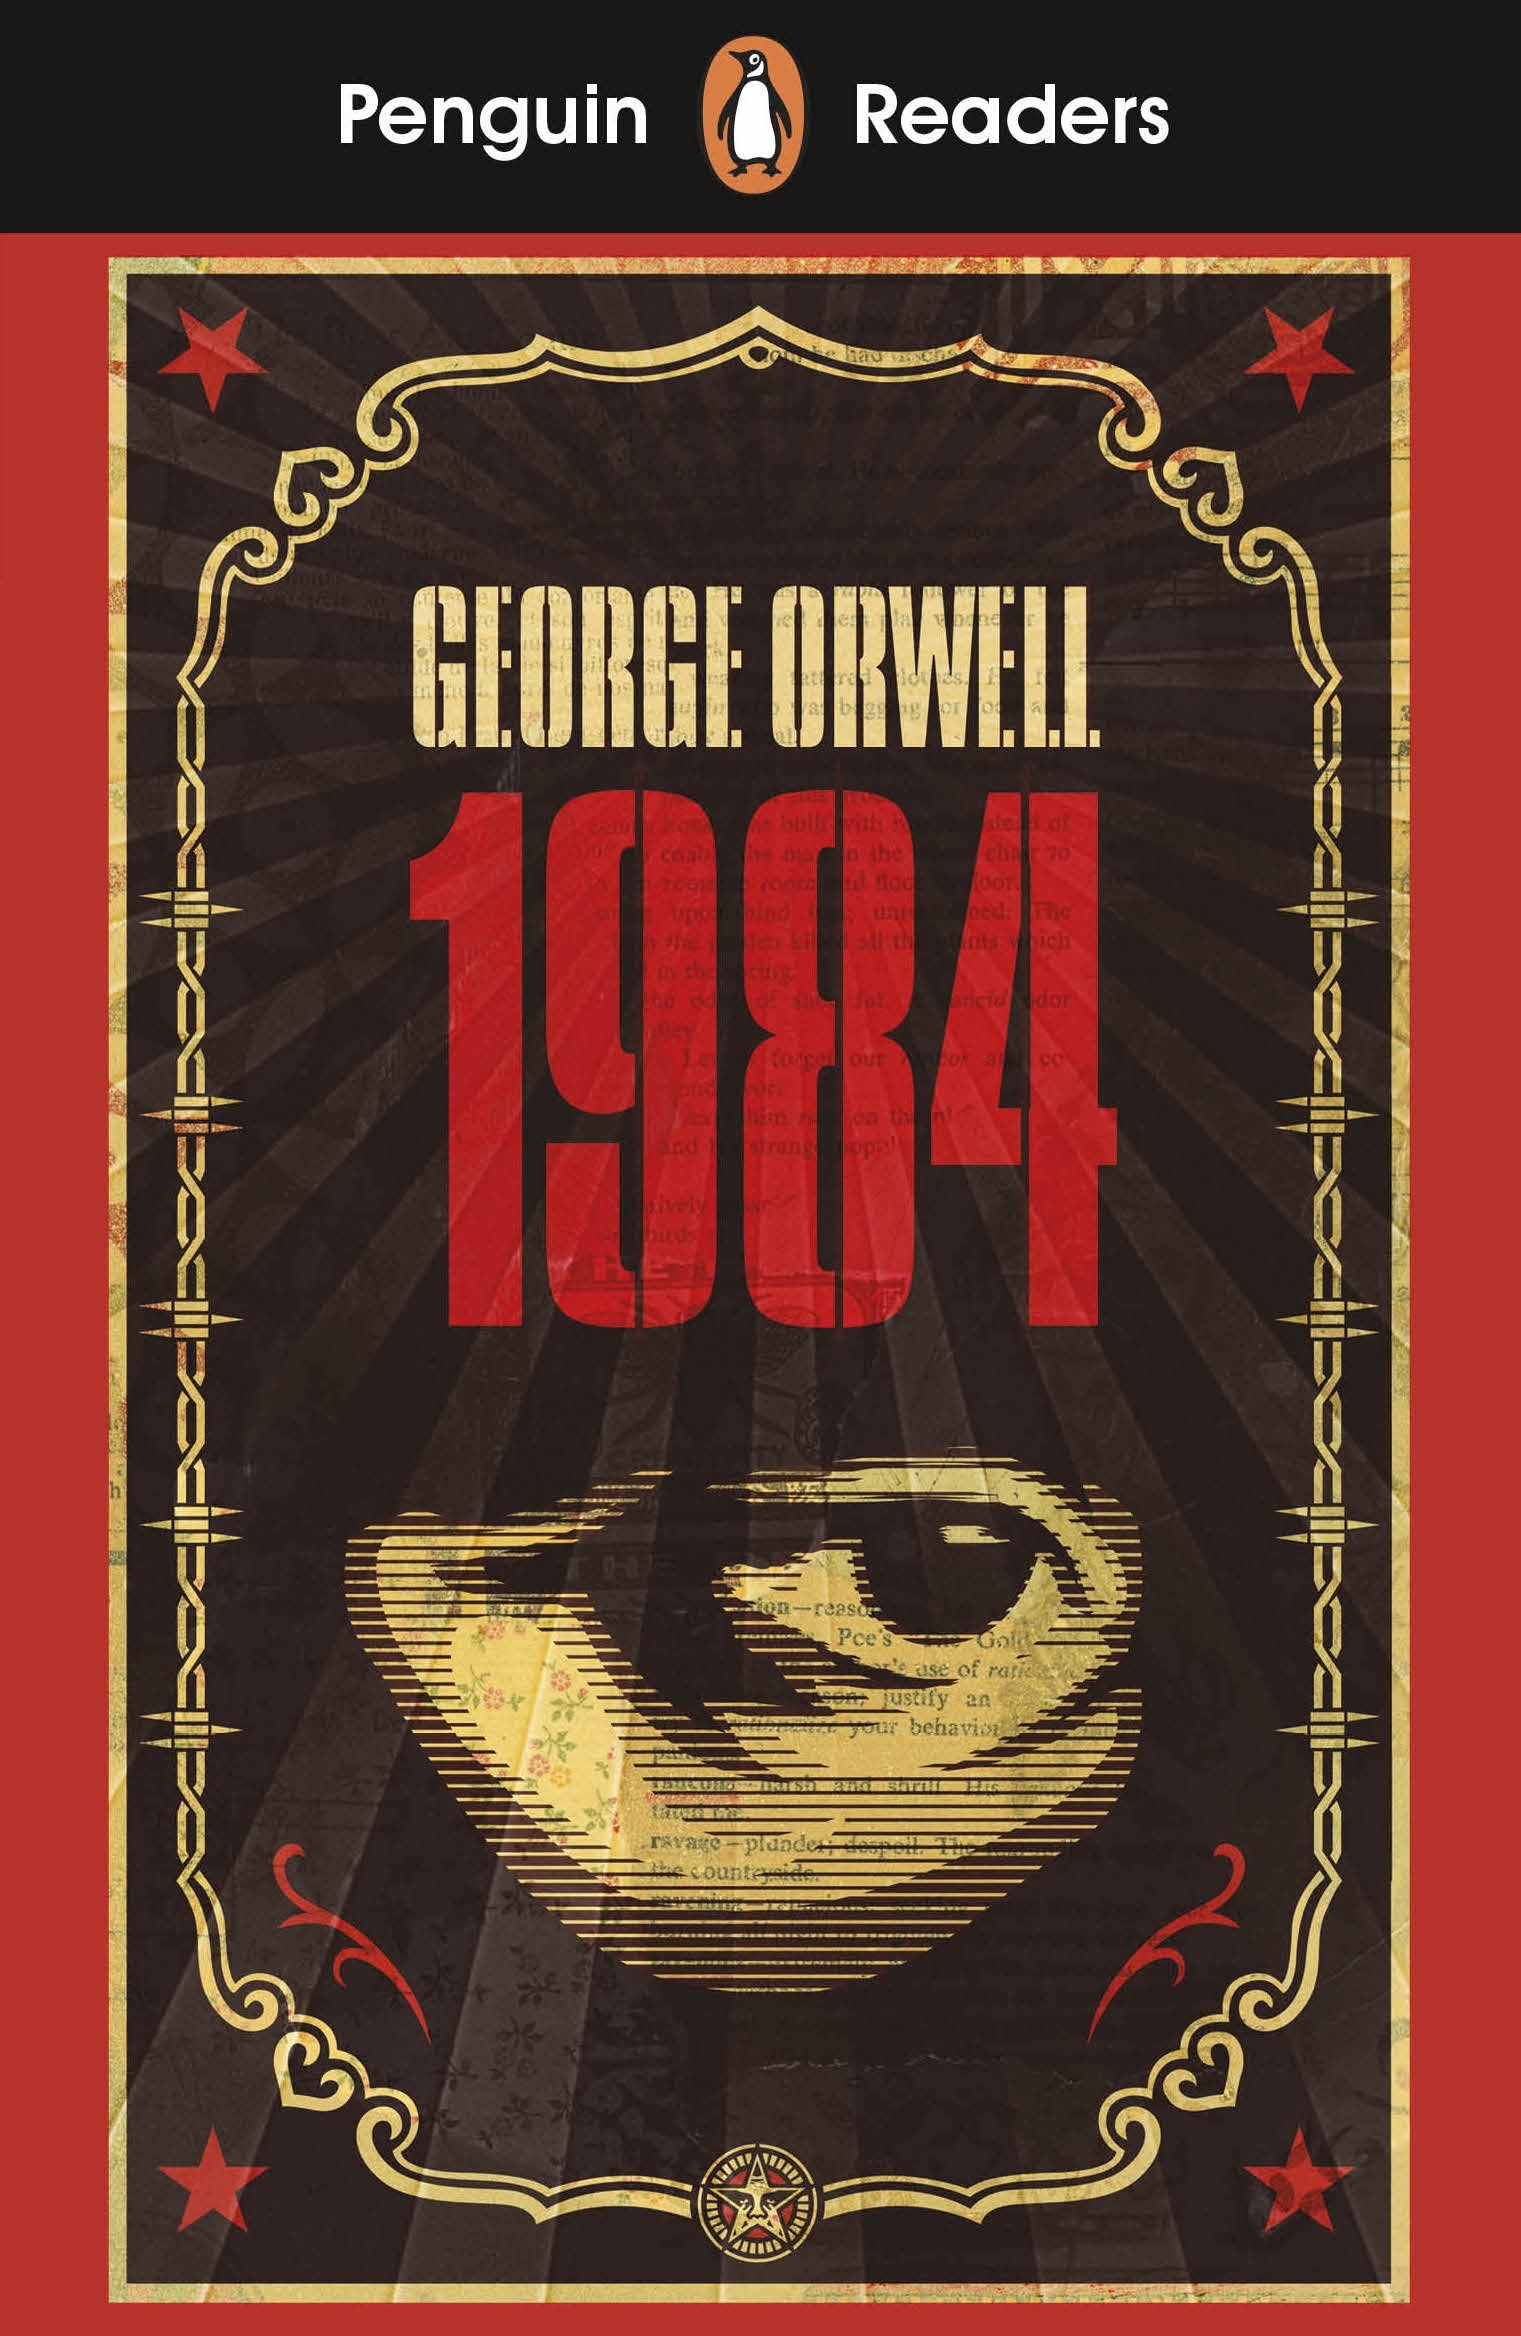 Book “Penguin Readers Level 7: Nineteen Eighty-Four (ELT Graded Reader)” by George Orwell — May 14, 2020